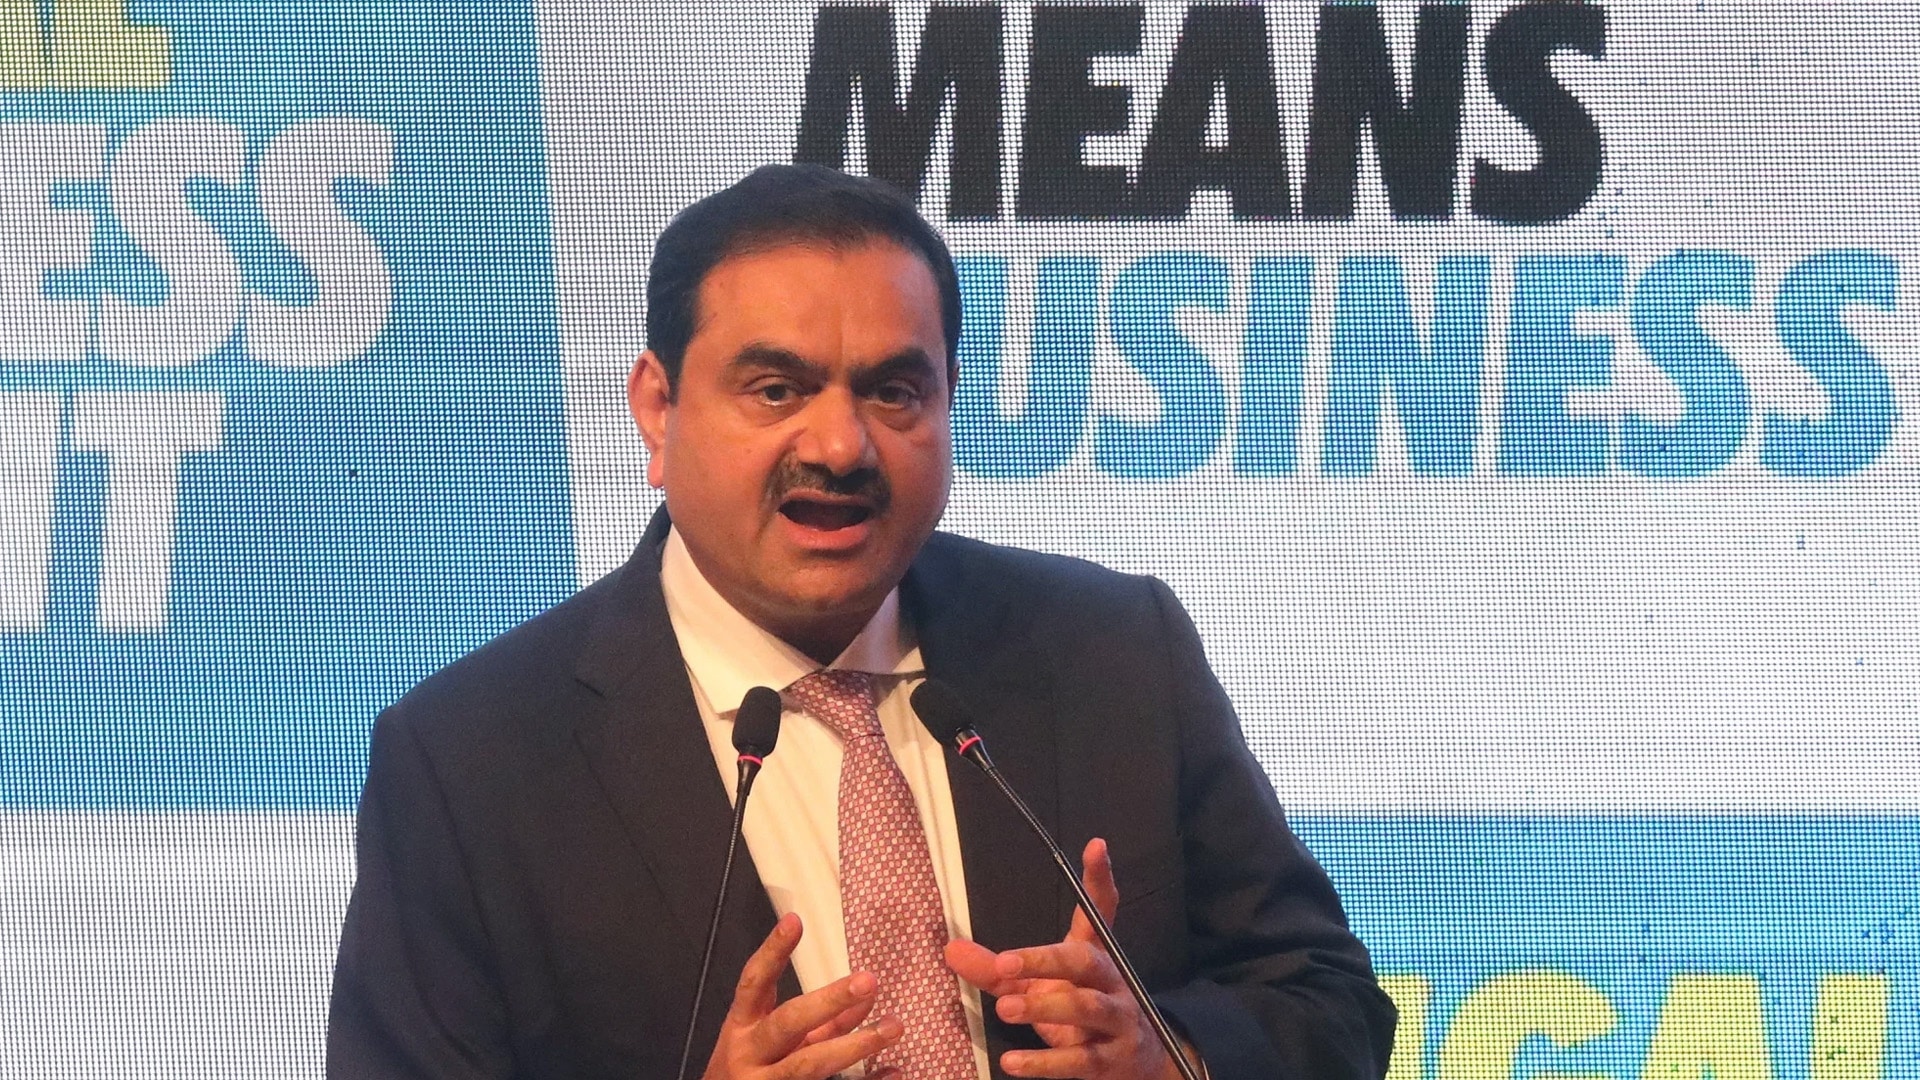 Adani repays $2.15 bn loan taken pledging shares, prepays another $500 mn loan for Ambuja cement